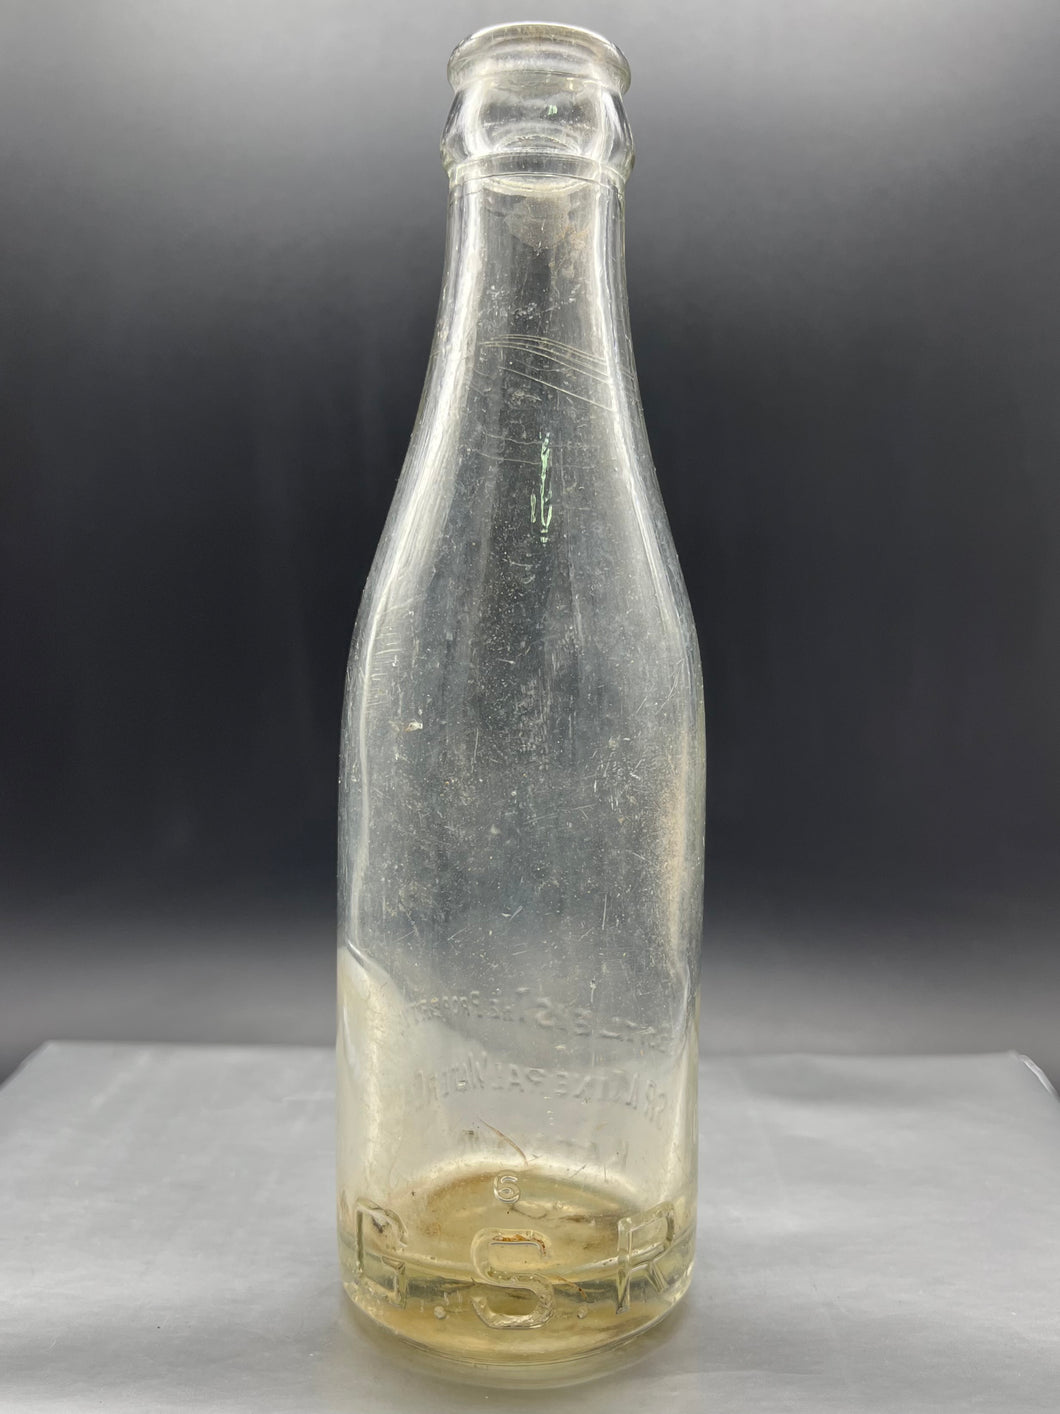 G.S.R Mineral Water Company Katanning 6oz Bottle